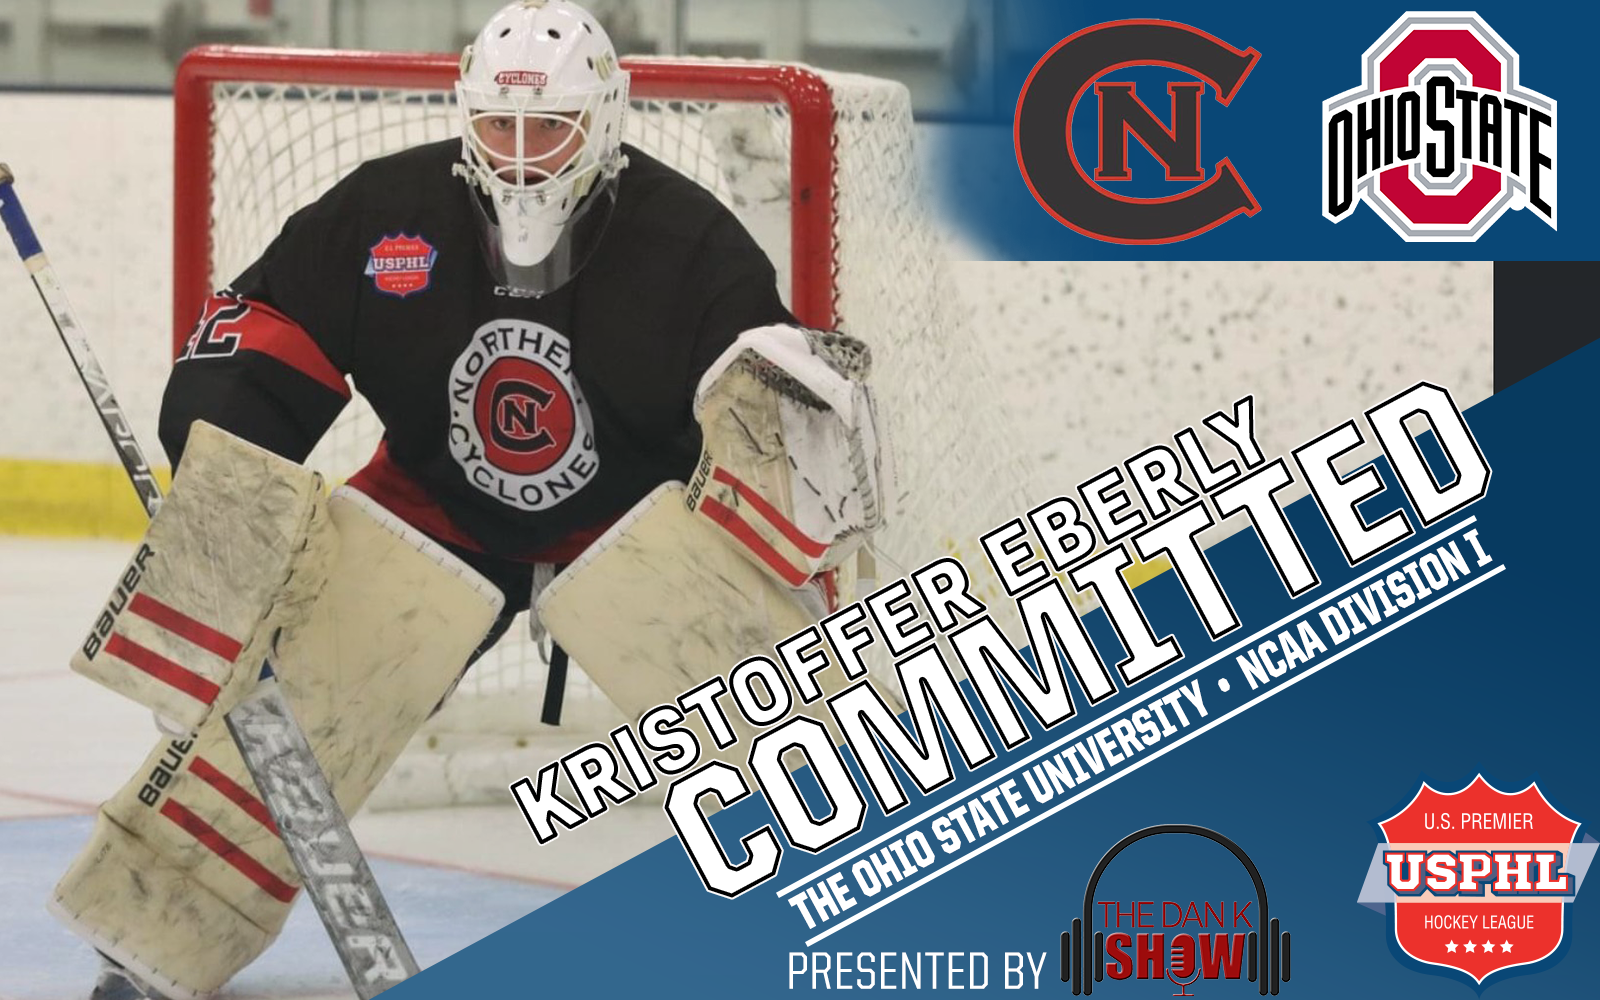 Northern Cyclones NCDC All-Star Goalie Eberly Commits To The Ohio State University